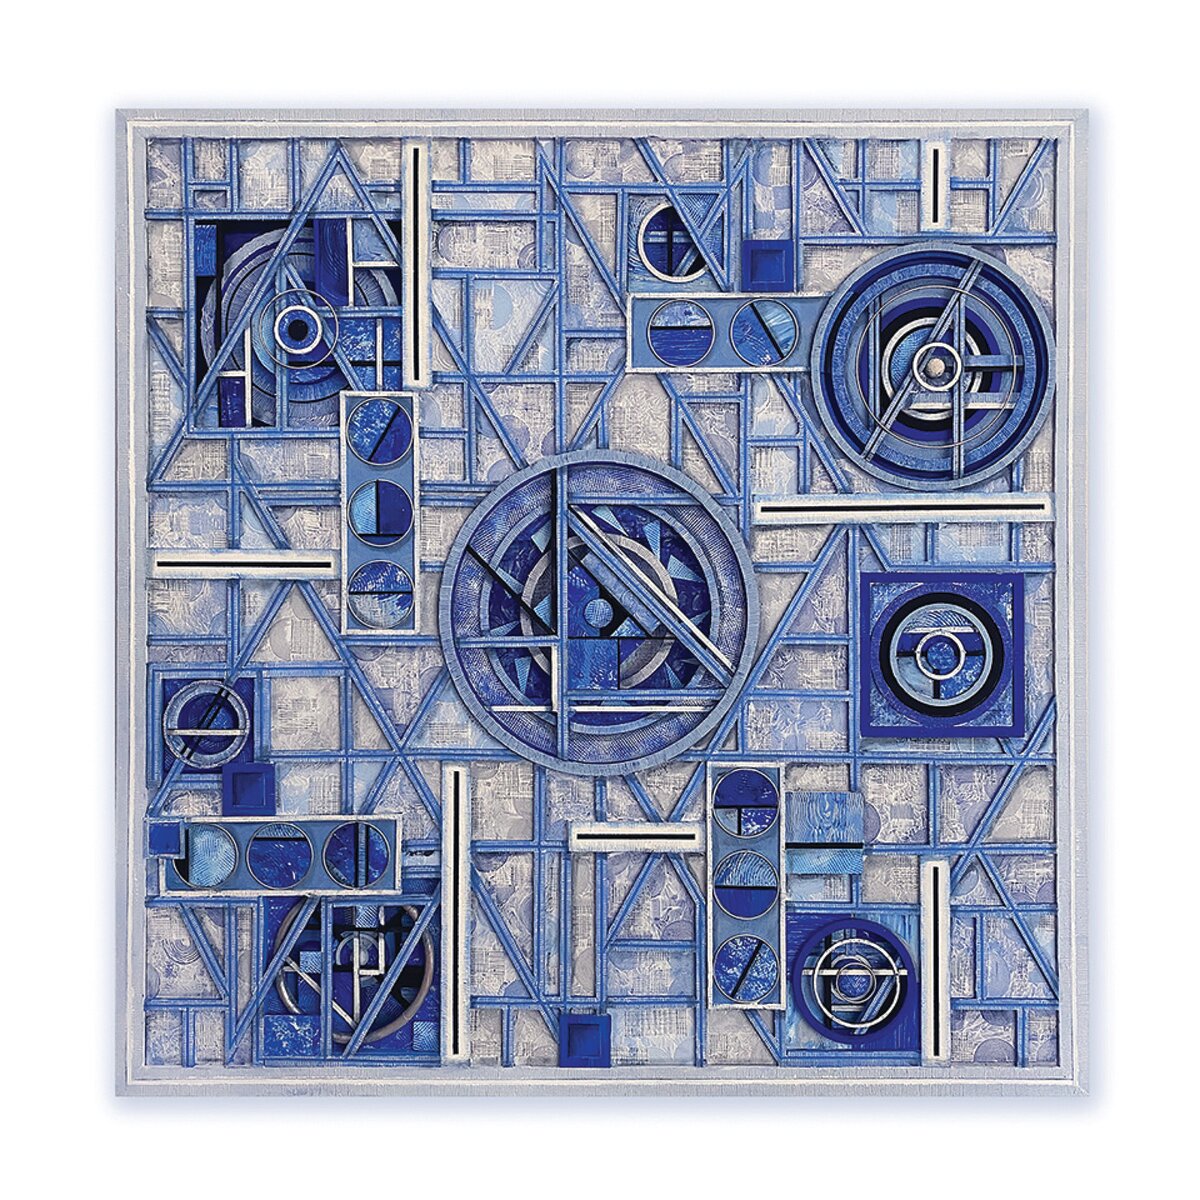 “Color Me Blue” by Chuck Fischer is made of aluminum, wood, modeling paste, metal wire, gesso and acrylic.